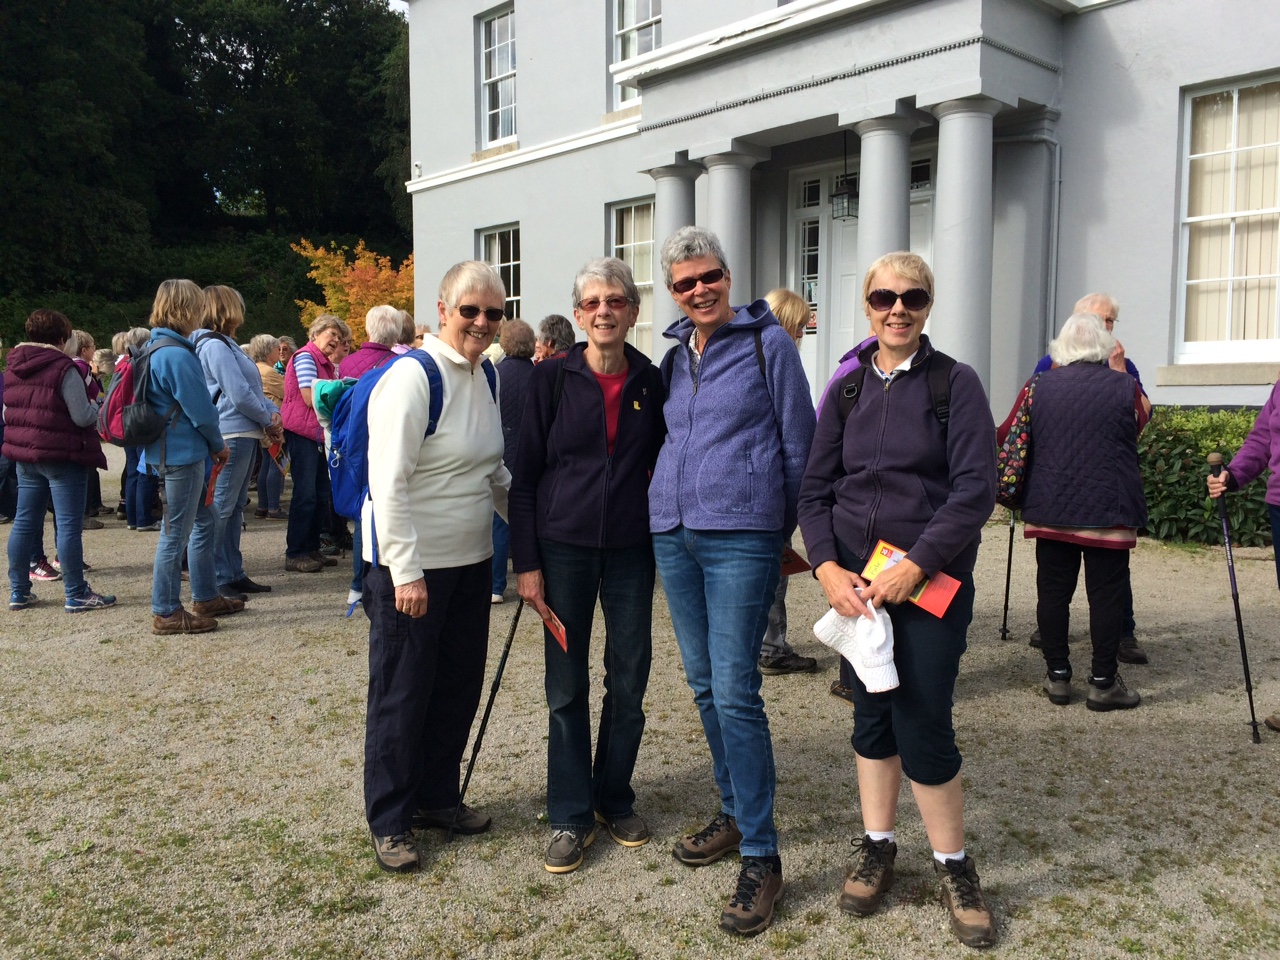 The women of Brixham WI out for a day's walking